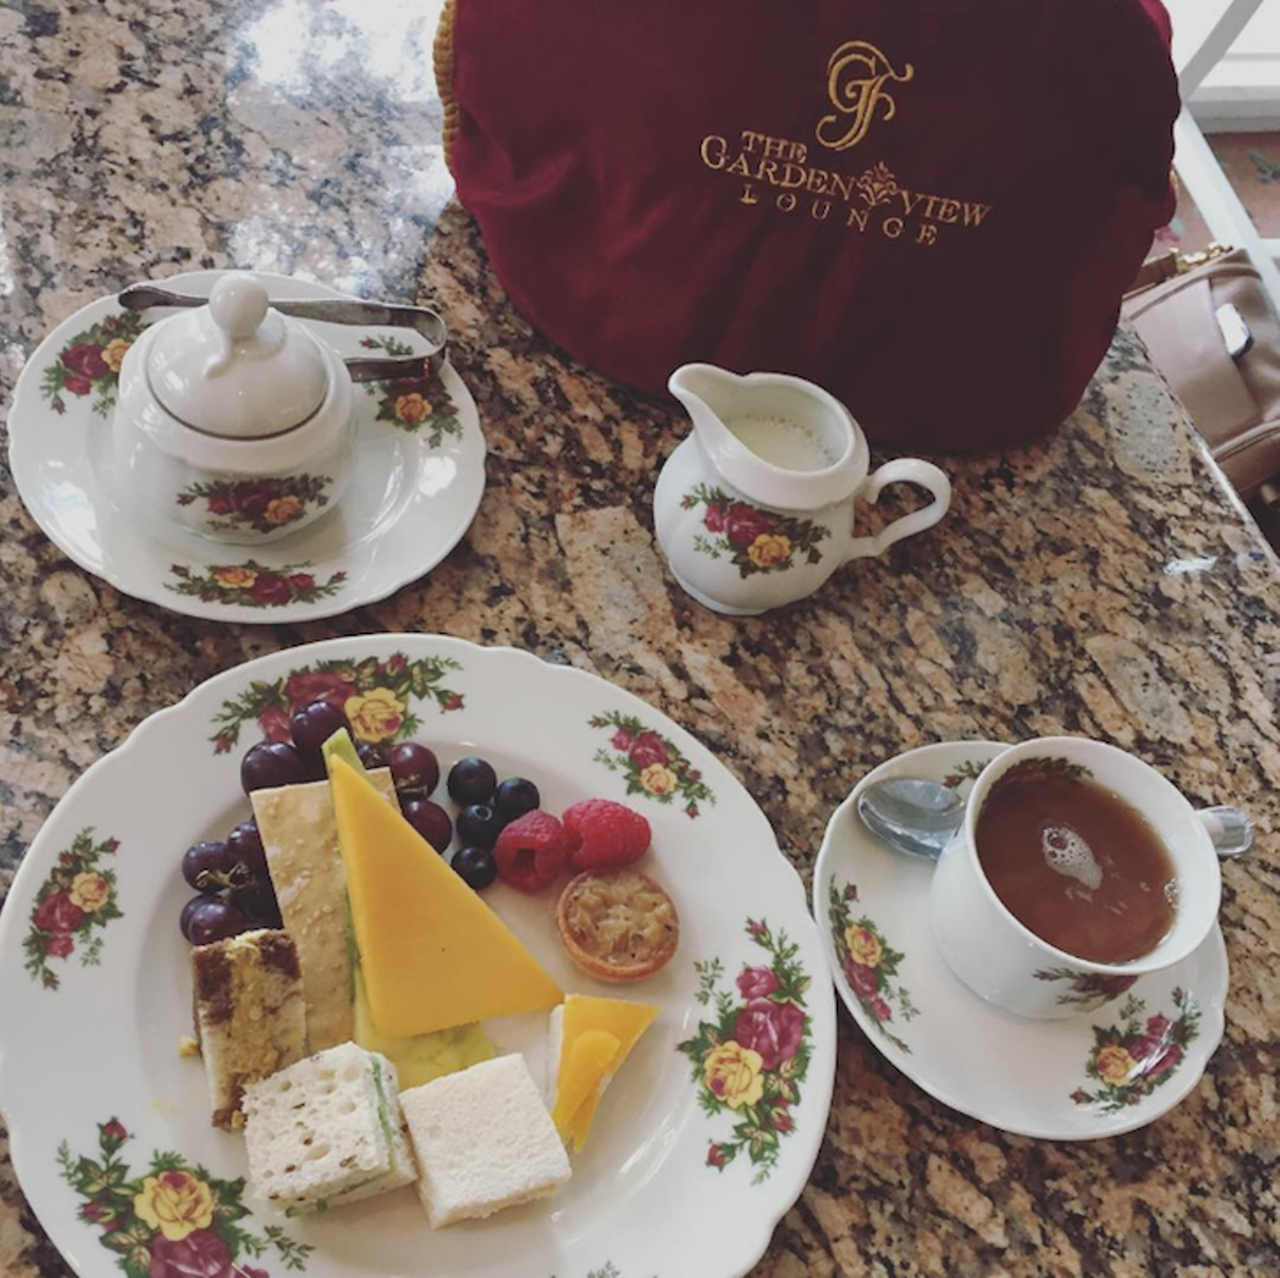 Garden View Tea Room
Disney&#146;s Grand Floridian Resort & Spa
If you find yourself in need of a tea break near Disney, the Garden View Tea Room&#146;s flowery cups and buttery biscuits are a calm after the storm of roller coasters and cartoon characters. 
Photo via chopstix012/Instagram